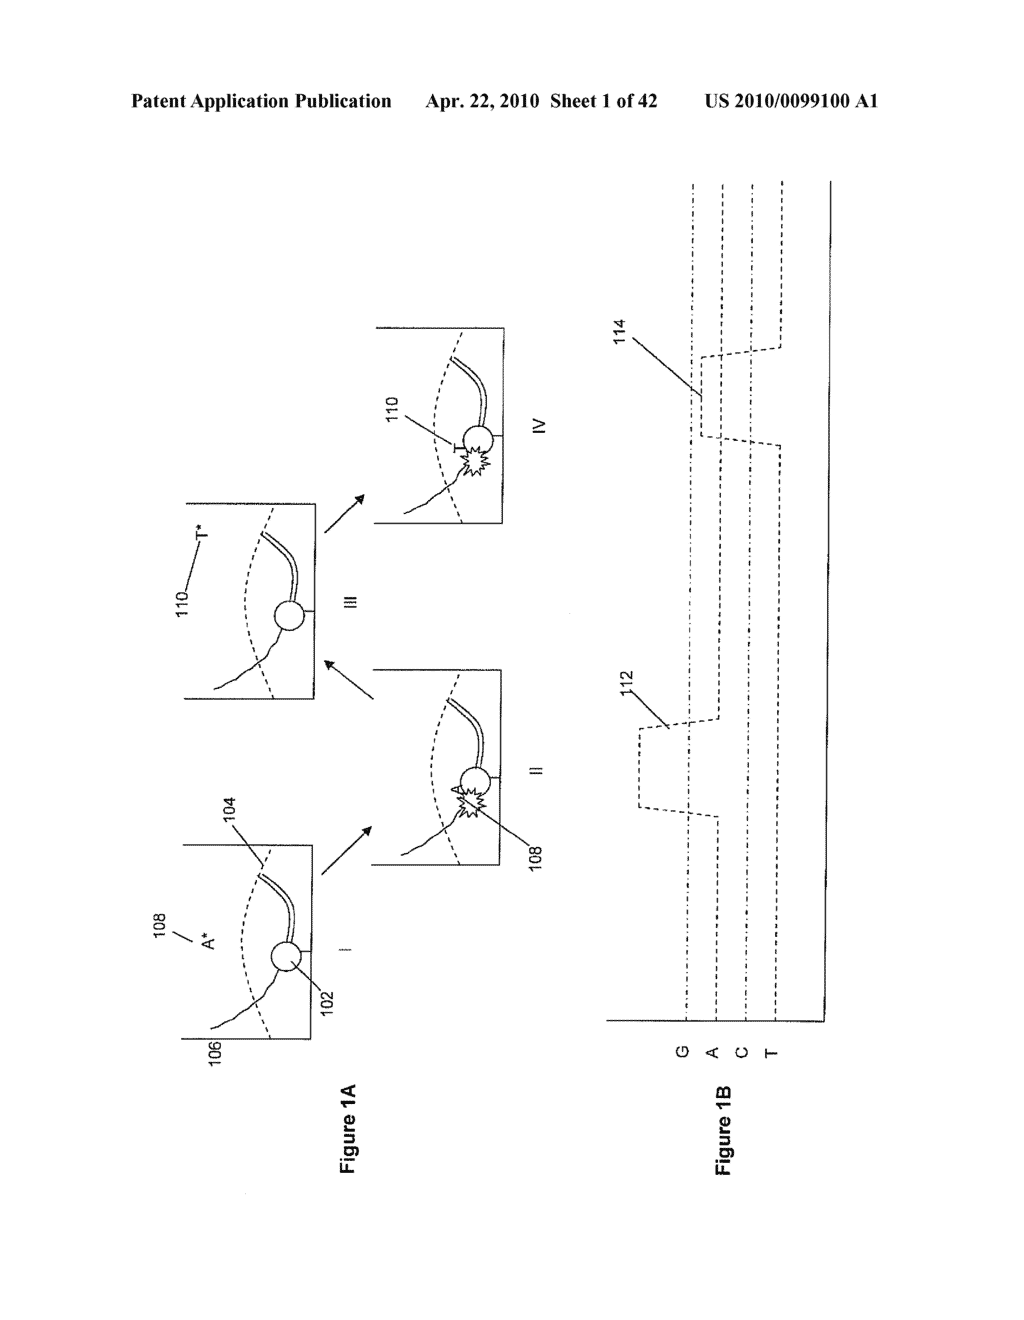 'ULTRA-HIGH MULTIPLEX ANALYTICAL SYSTEMS AND METHODS